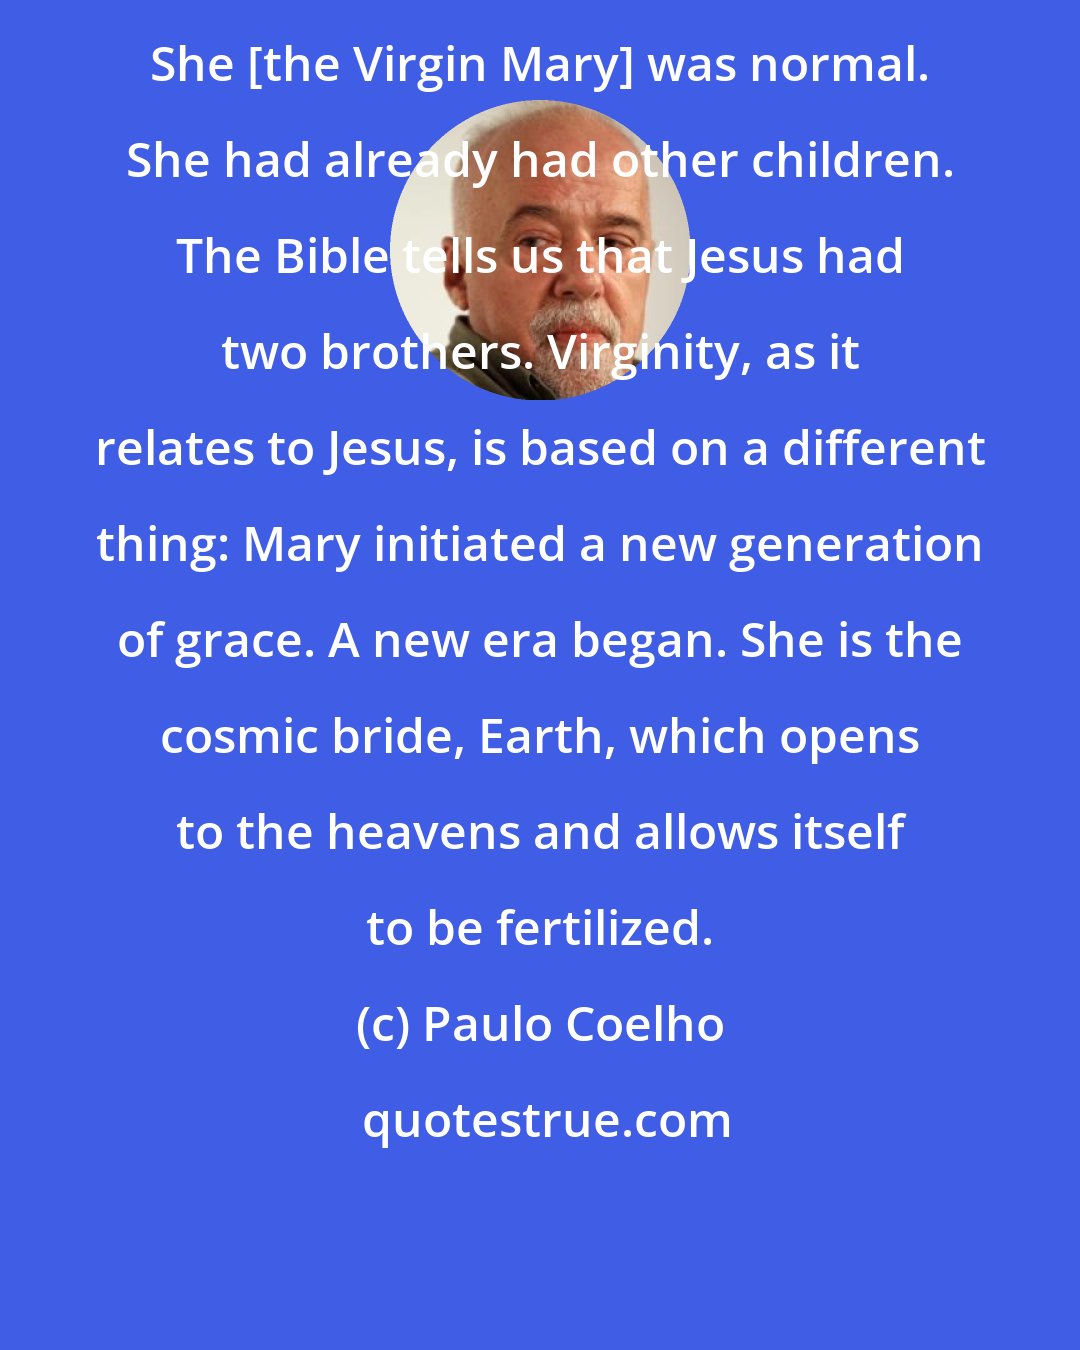 Paulo Coelho: She [the Virgin Mary] was normal. She had already had other children. The Bible tells us that Jesus had two brothers. Virginity, as it relates to Jesus, is based on a different thing: Mary initiated a new generation of grace. A new era began. She is the cosmic bride, Earth, which opens to the heavens and allows itself to be fertilized.